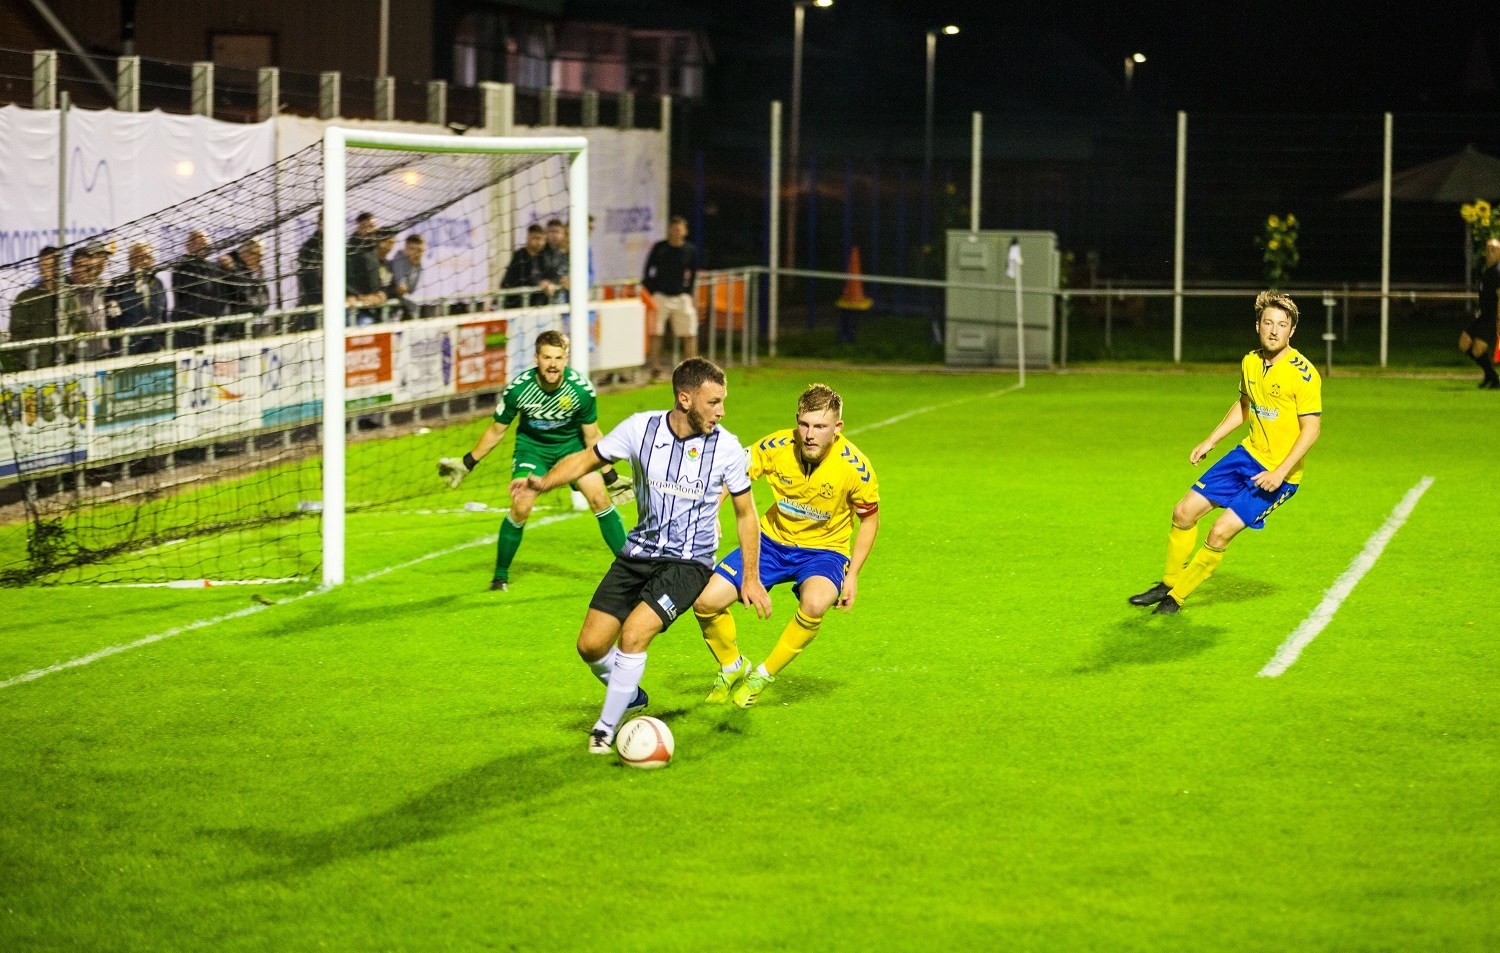 Ammanford AFC v Cwmbran Celtic Picture: @hrmediaproductions